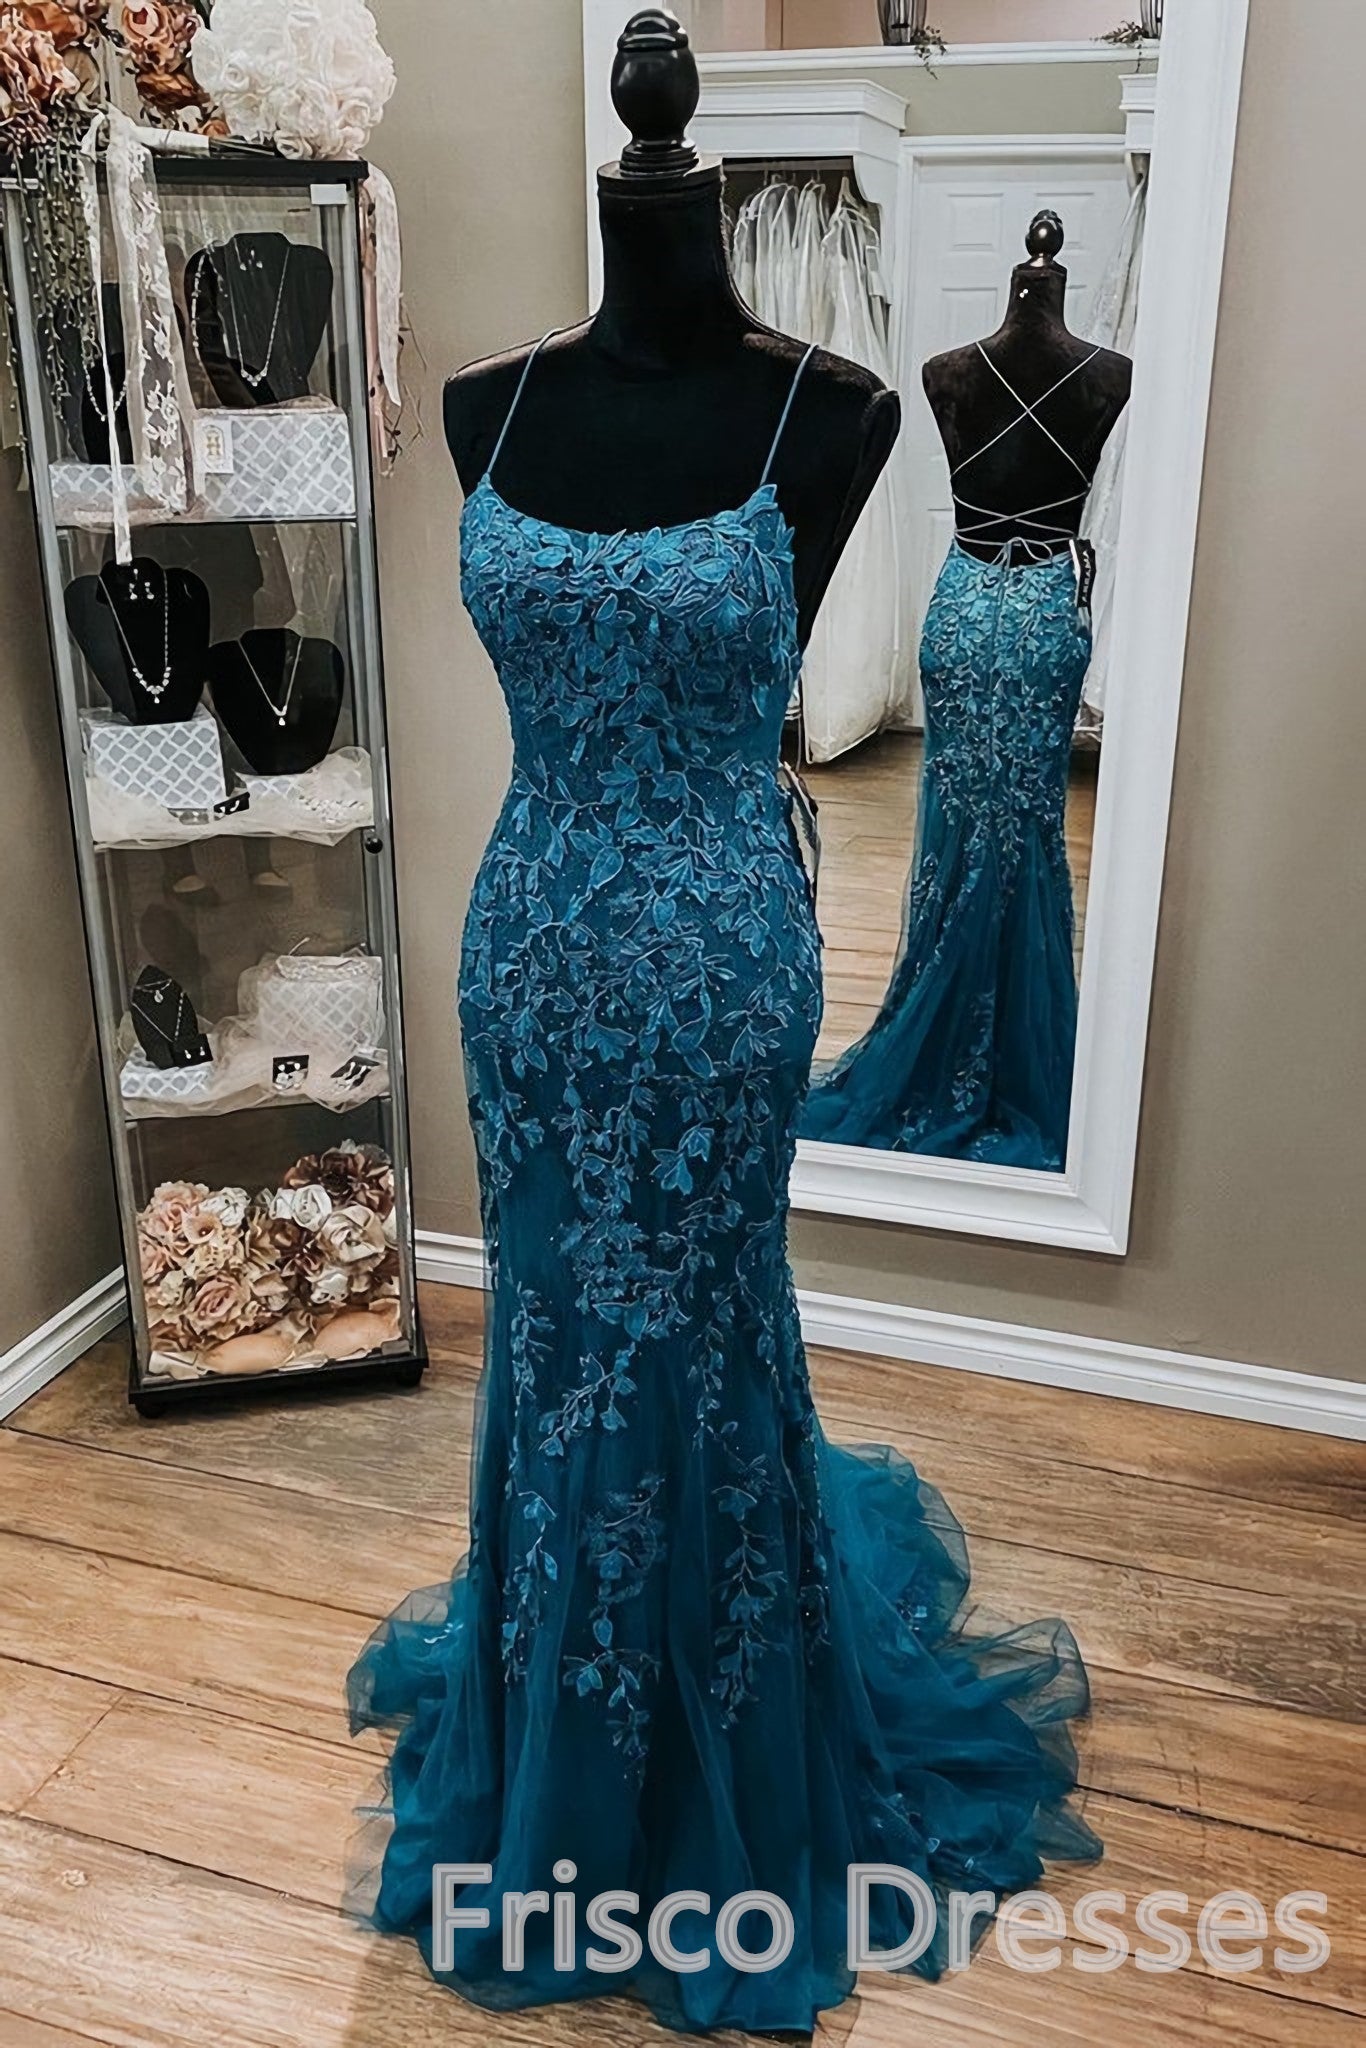 Mermaid Teal Lace Backless Mermaid Dark Teal Lace Long Corset Prom Dresses Long Corset Formal Evening Dresses outfit, Party Dress Shop Near Me